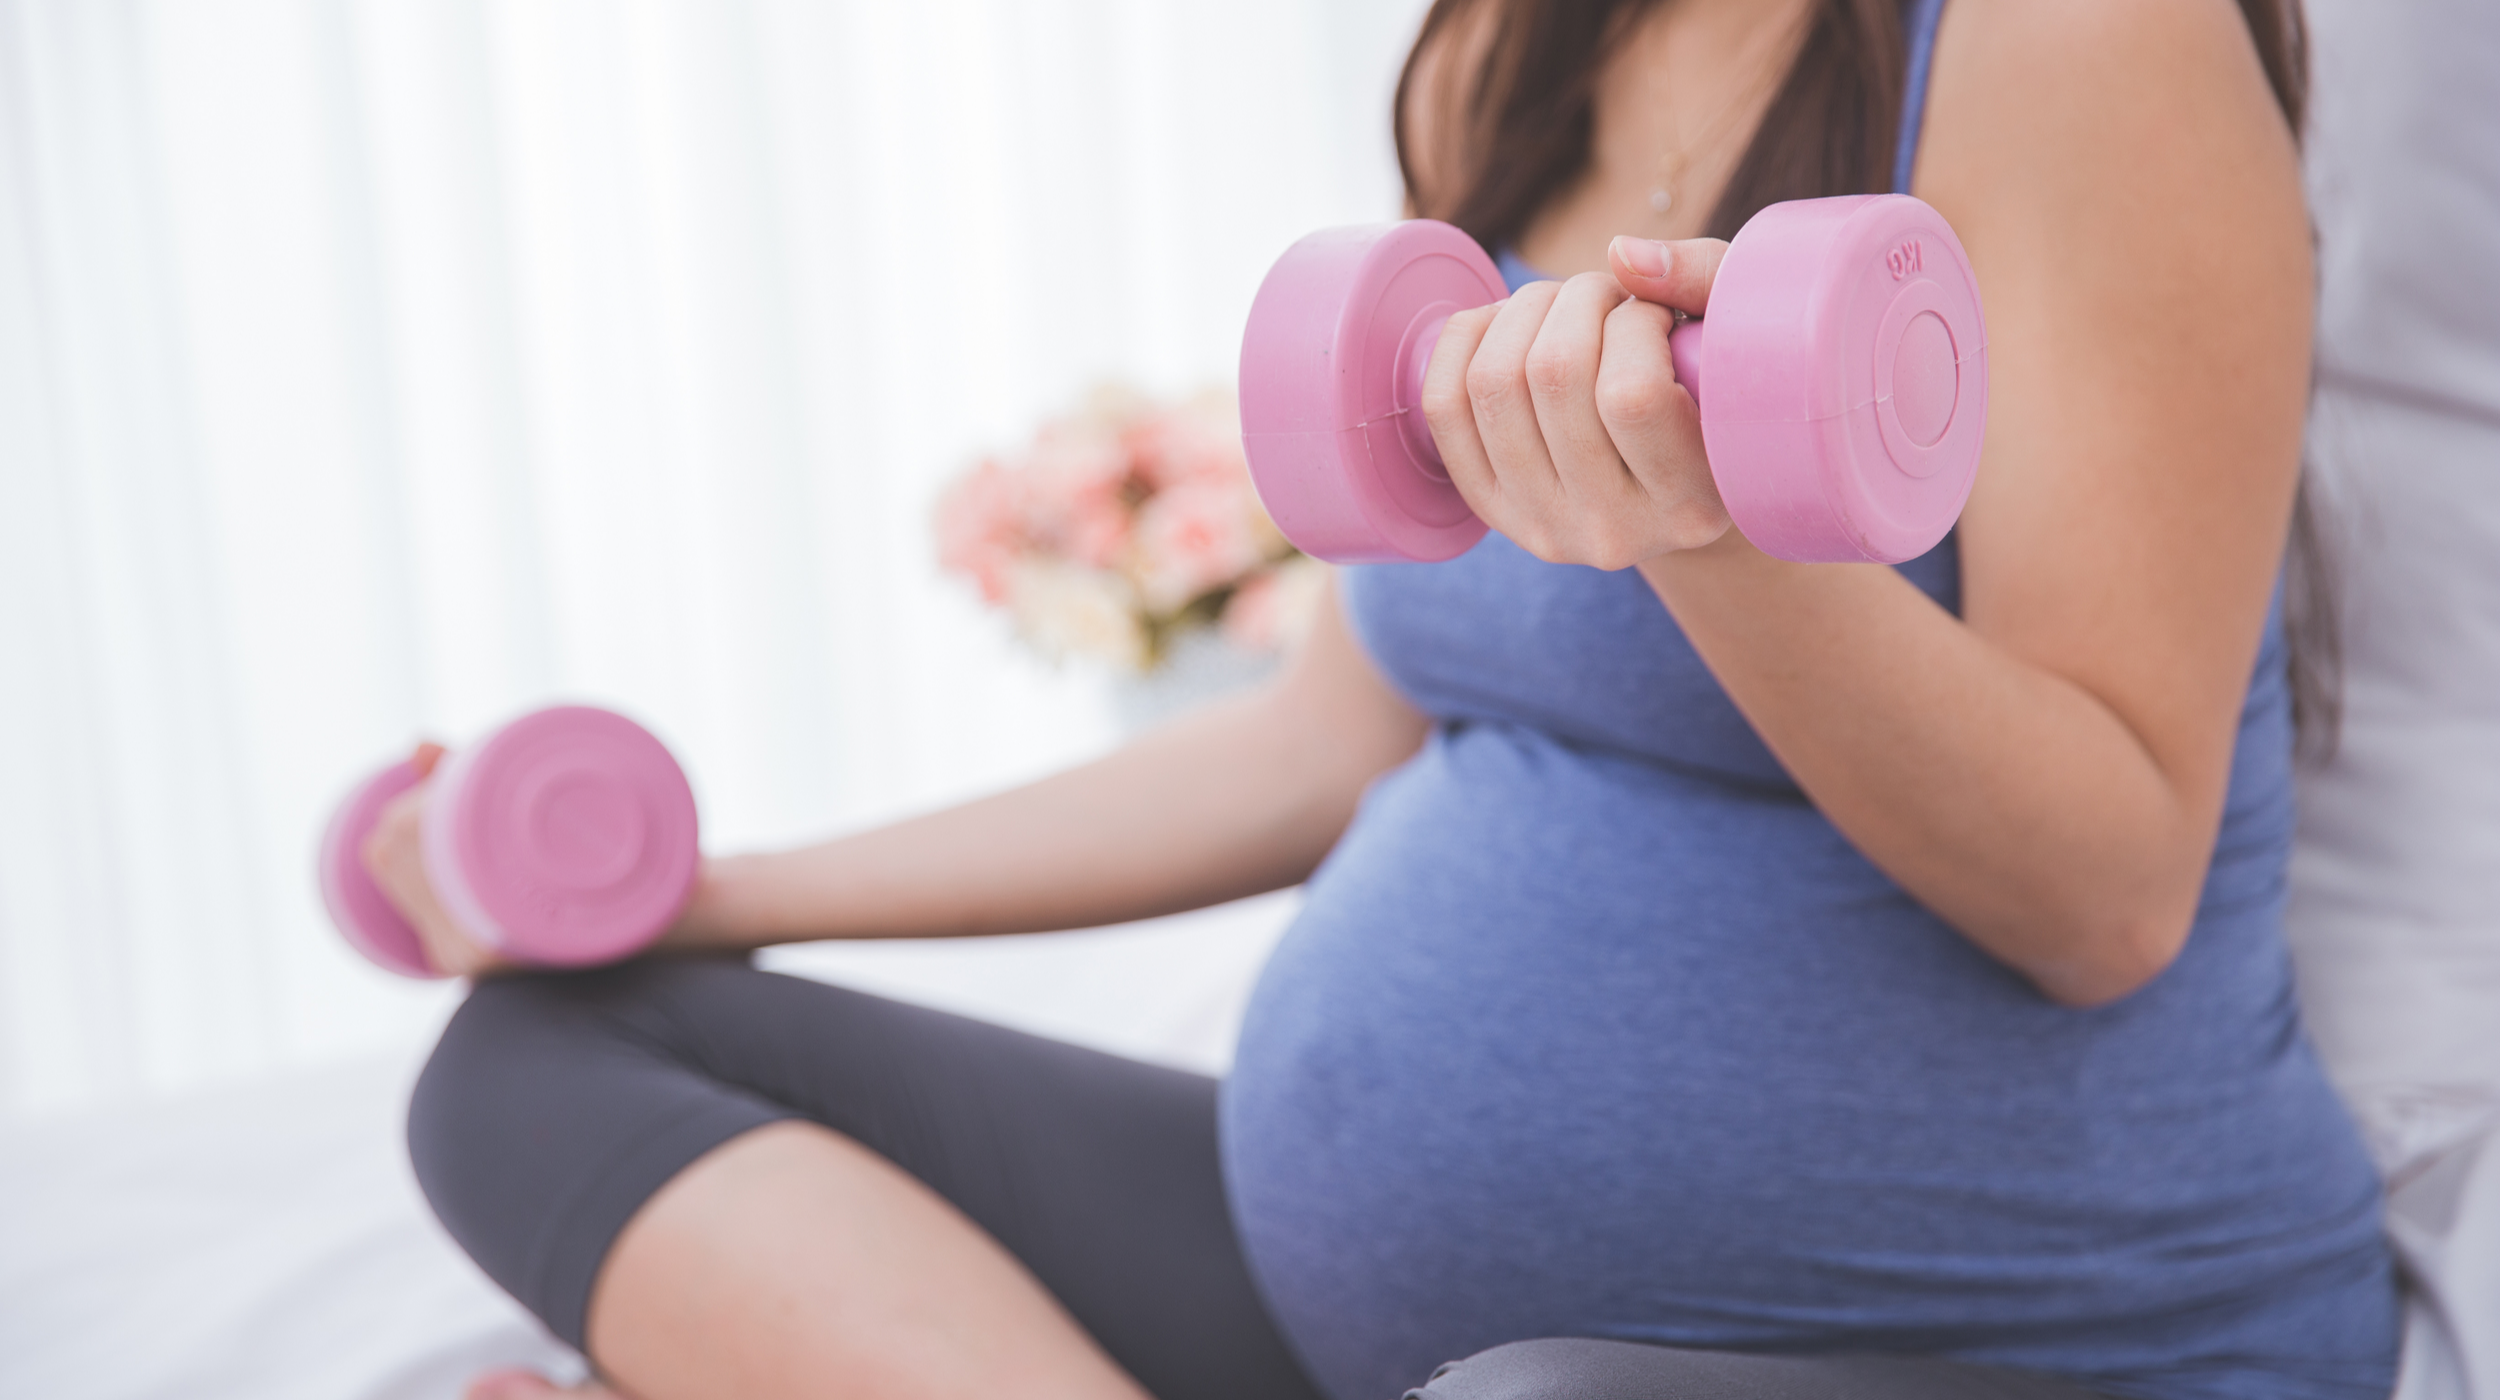 Resistance Training During Pregnancy?